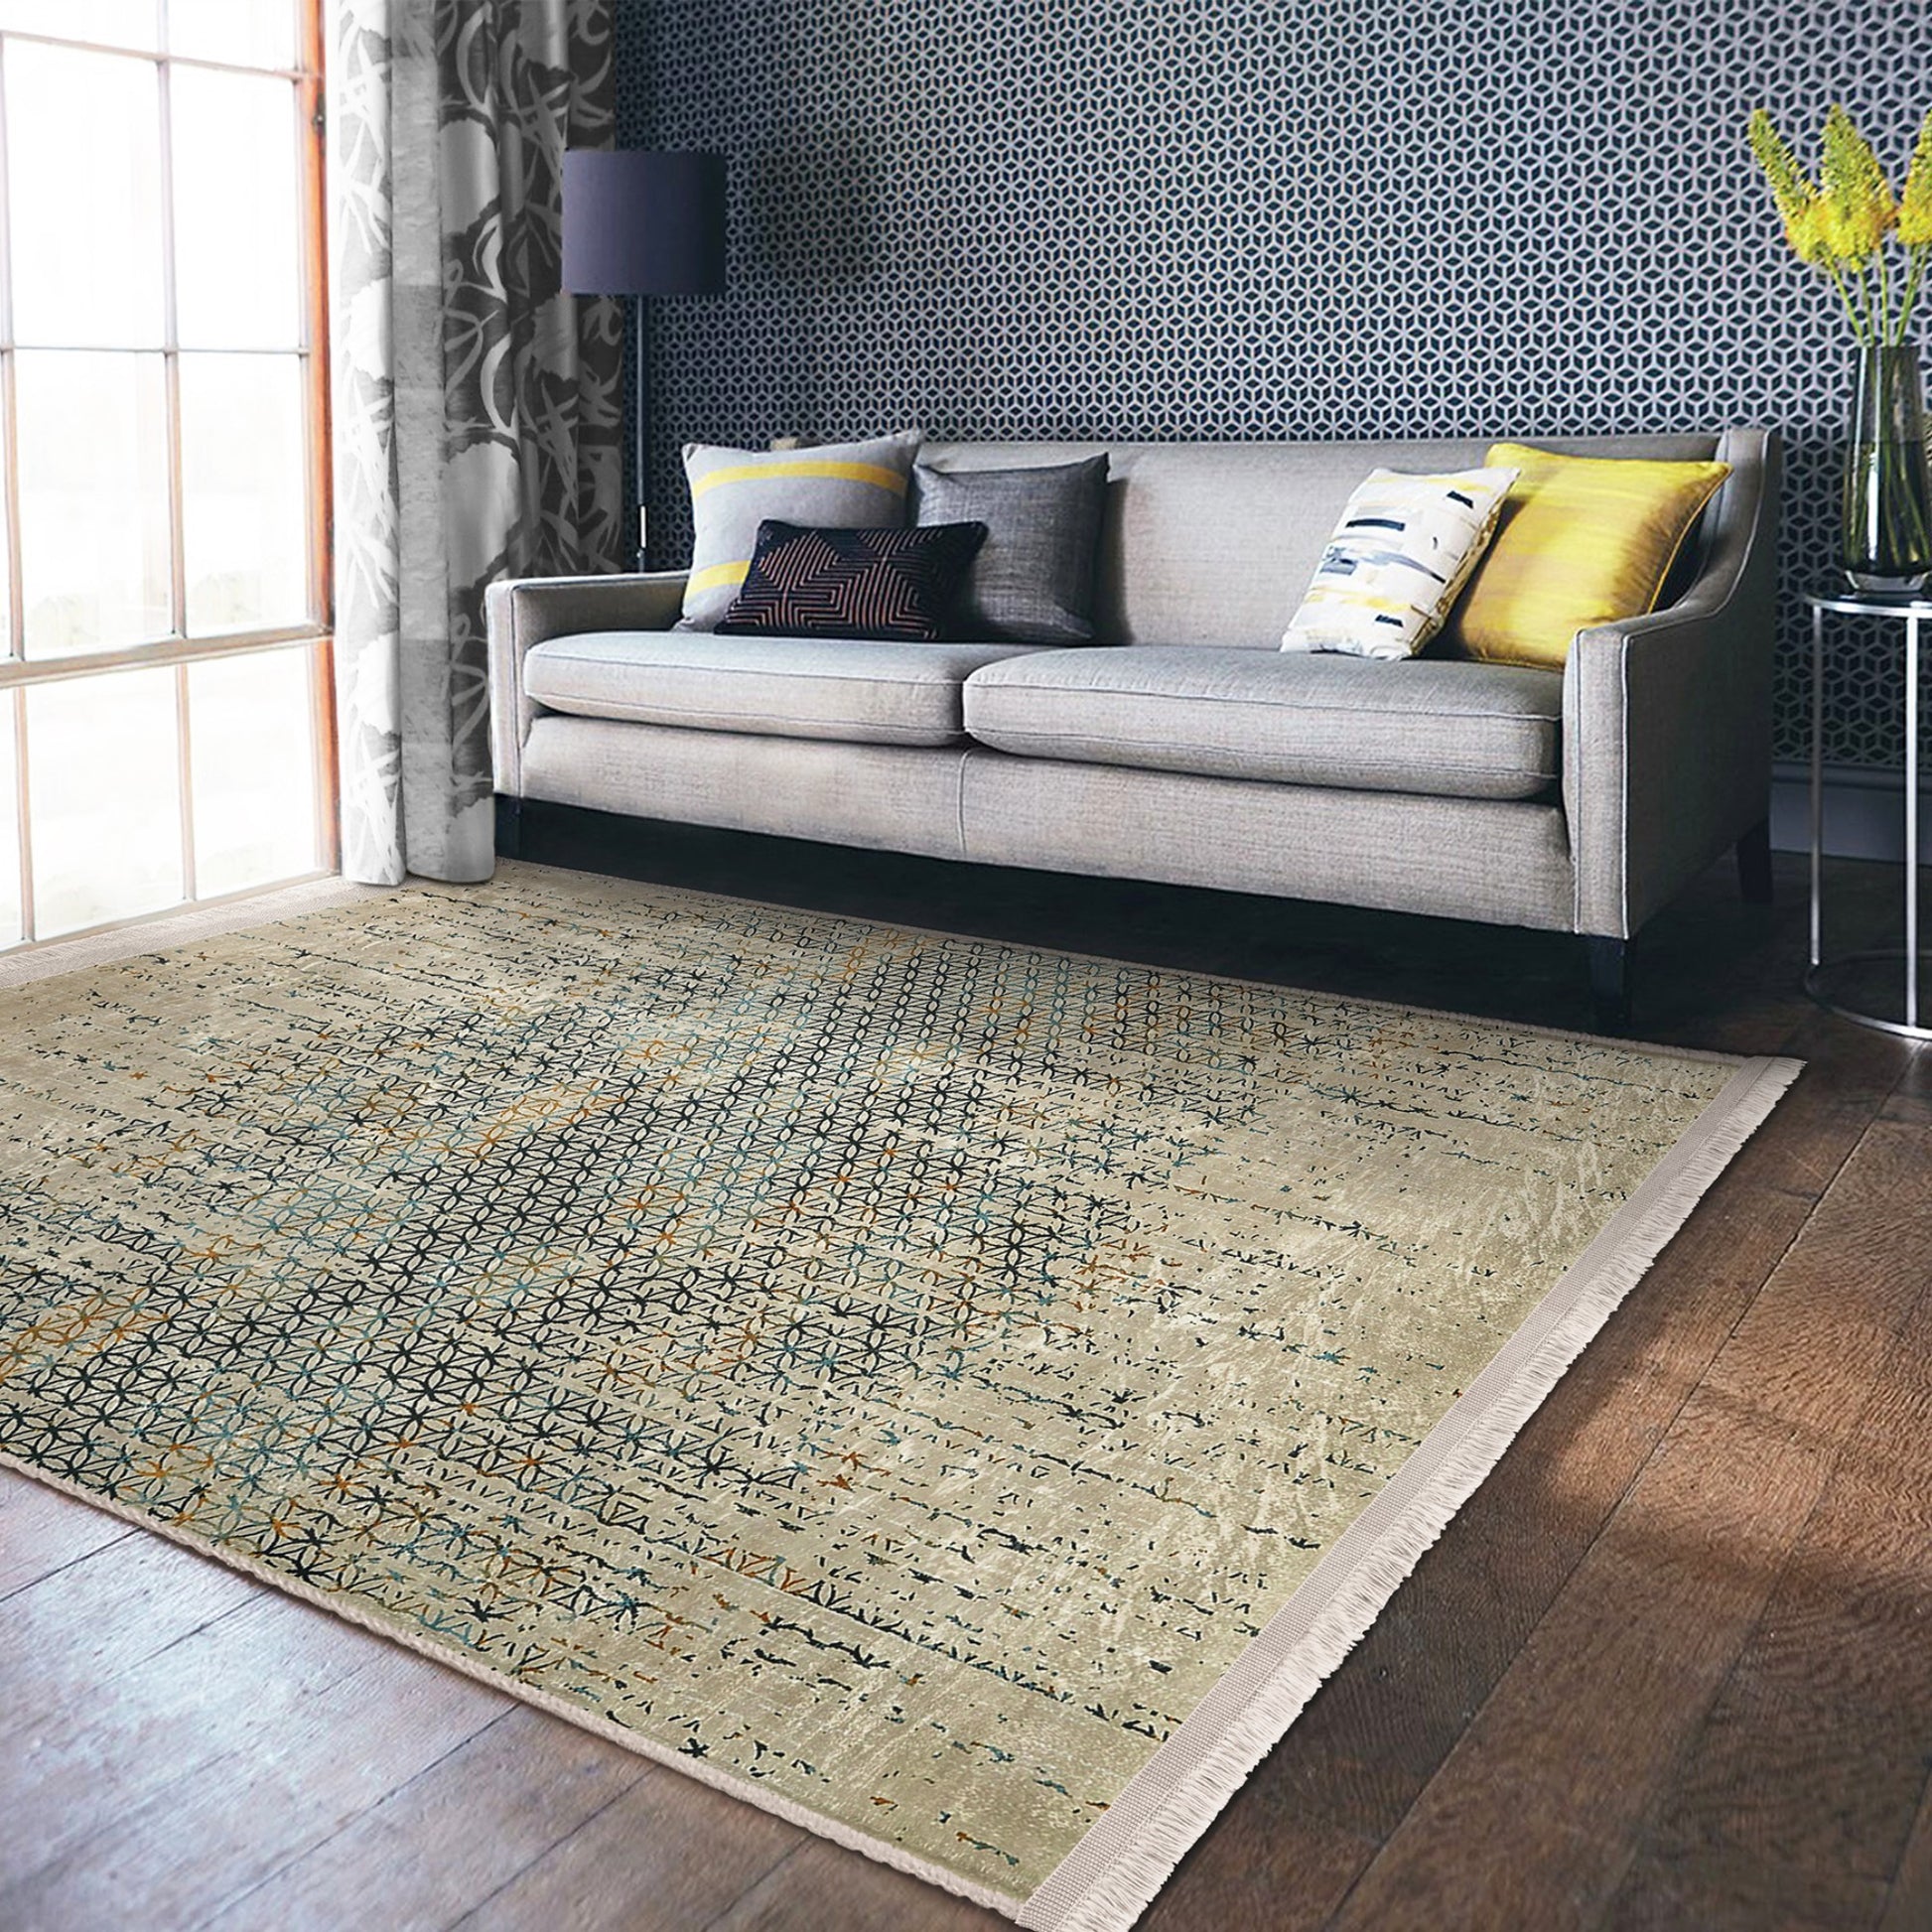 Functional Rug with Sustainable Jute Material